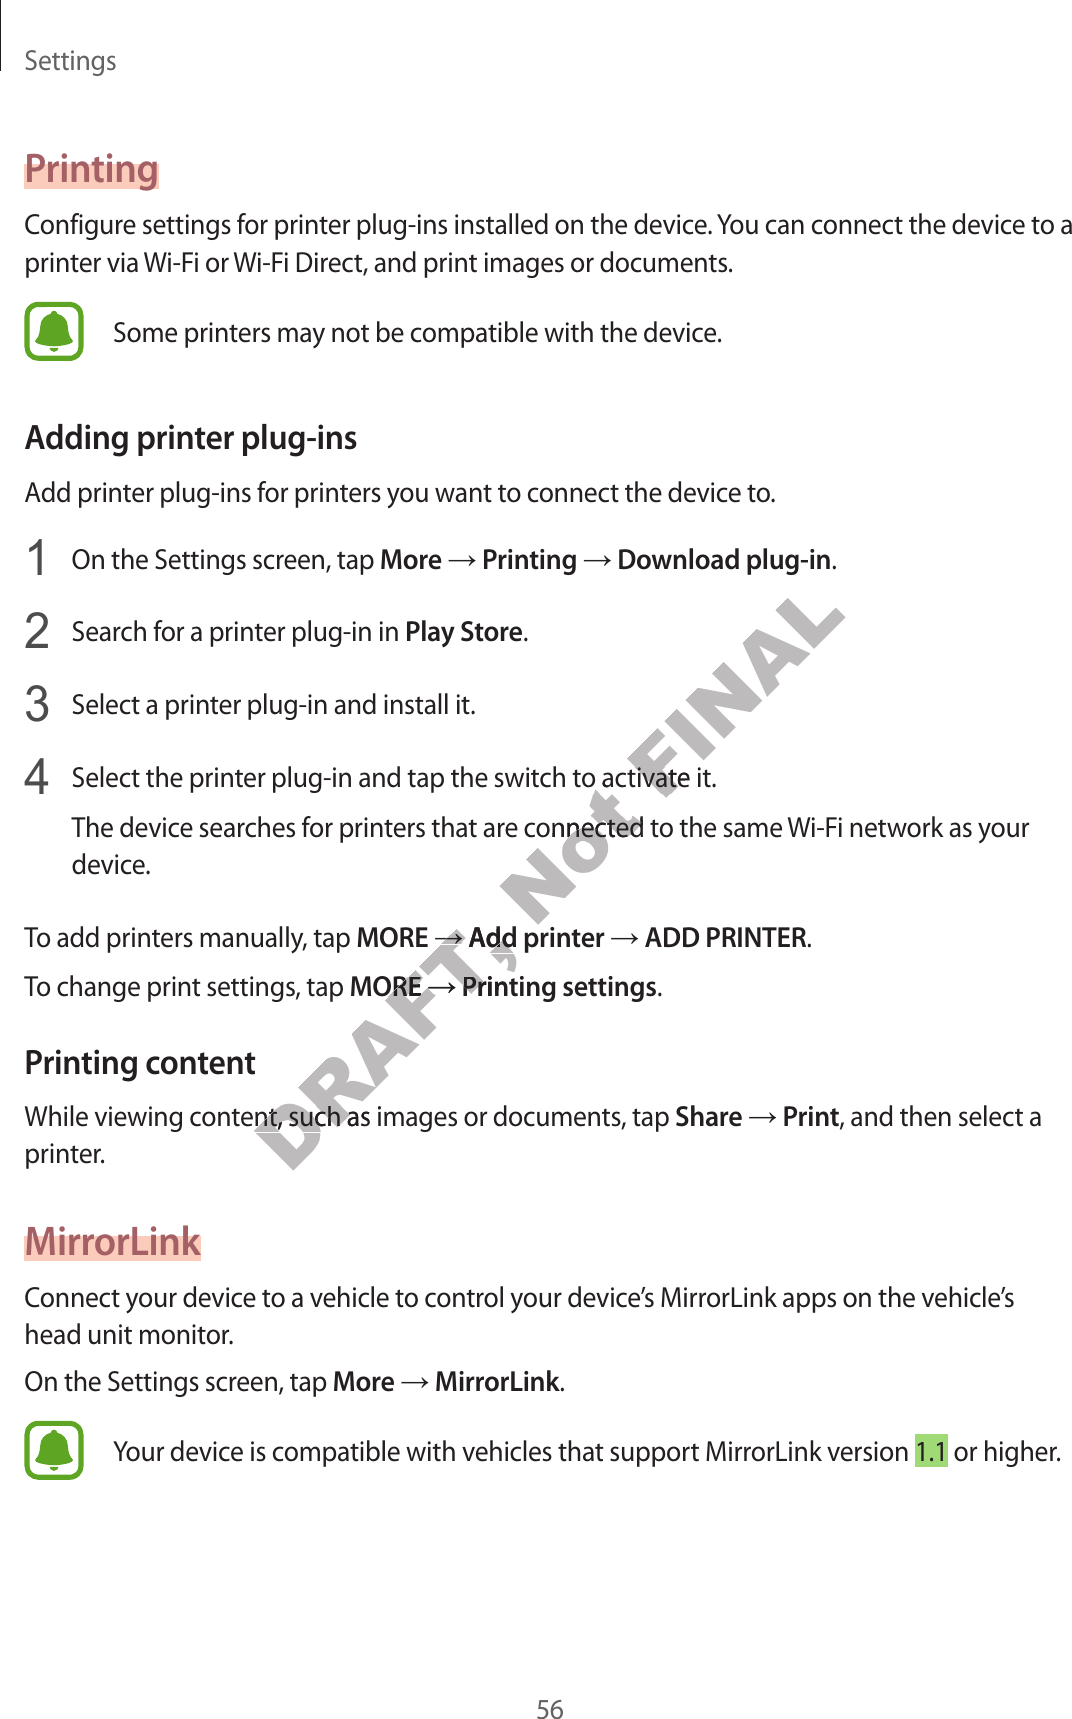 Settings56PrintingConfigur e settings f or print er plug-ins installed on the device. You can connect the device to a printer via Wi-Fi or Wi-Fi Dir ect, and print images or documents.Some printers may not be compa tible with the device .Adding prin ter plug-insAdd print er plug-ins f or printers y ou w ant t o connect the device to.1  On the Settings screen, tap More → Printing → Download plug-in.2  Search for a print er plug-in in Play St or e.3  Select a printer plug-in and install it.4  Select the printer plug-in and tap the switch t o activate it.The device sear ches f or print ers that ar e c onnected to the same Wi-Fi network as your device.To add printers manually, tap MORE → Add prin ter → ADD PRINTER.To change print settings, tap MORE → Printing settings.Prin ting c ont entWhile viewing cont ent , such as images or documents , tap Share → Print, and then select a printer.MirrorLinkConnect your device t o a v ehicle to c ontr ol y our devic e’s MirrorLink apps on the vehicle’s head unit monitor.On the Settings screen, tap More → MirrorLink.Your device is compatible with vehicles that support MirrorLink version 1.1 or higher.DRAFT, →DRAFT, →Add prin terDRAFT, Add prin terMOREDRAFT, MORE→DRAFT, →Printing settingsDRAFT, Printing settingsWhile viewing cont ent , such as images or documents , tap DRAFT, While viewing cont ent , such as images or documents , tap Not Select the printer plug-in and tap the switch t o activate it.Not Select the printer plug-in and tap the switch t o activate it.The device sear ches f or print ers that ar e c onnected to the same Not The device sear ches f or print ers that ar e c onnected to the same FINALSelect the printer plug-in and tap the switch t o activate it.FINALSelect the printer plug-in and tap the switch t o activate it.